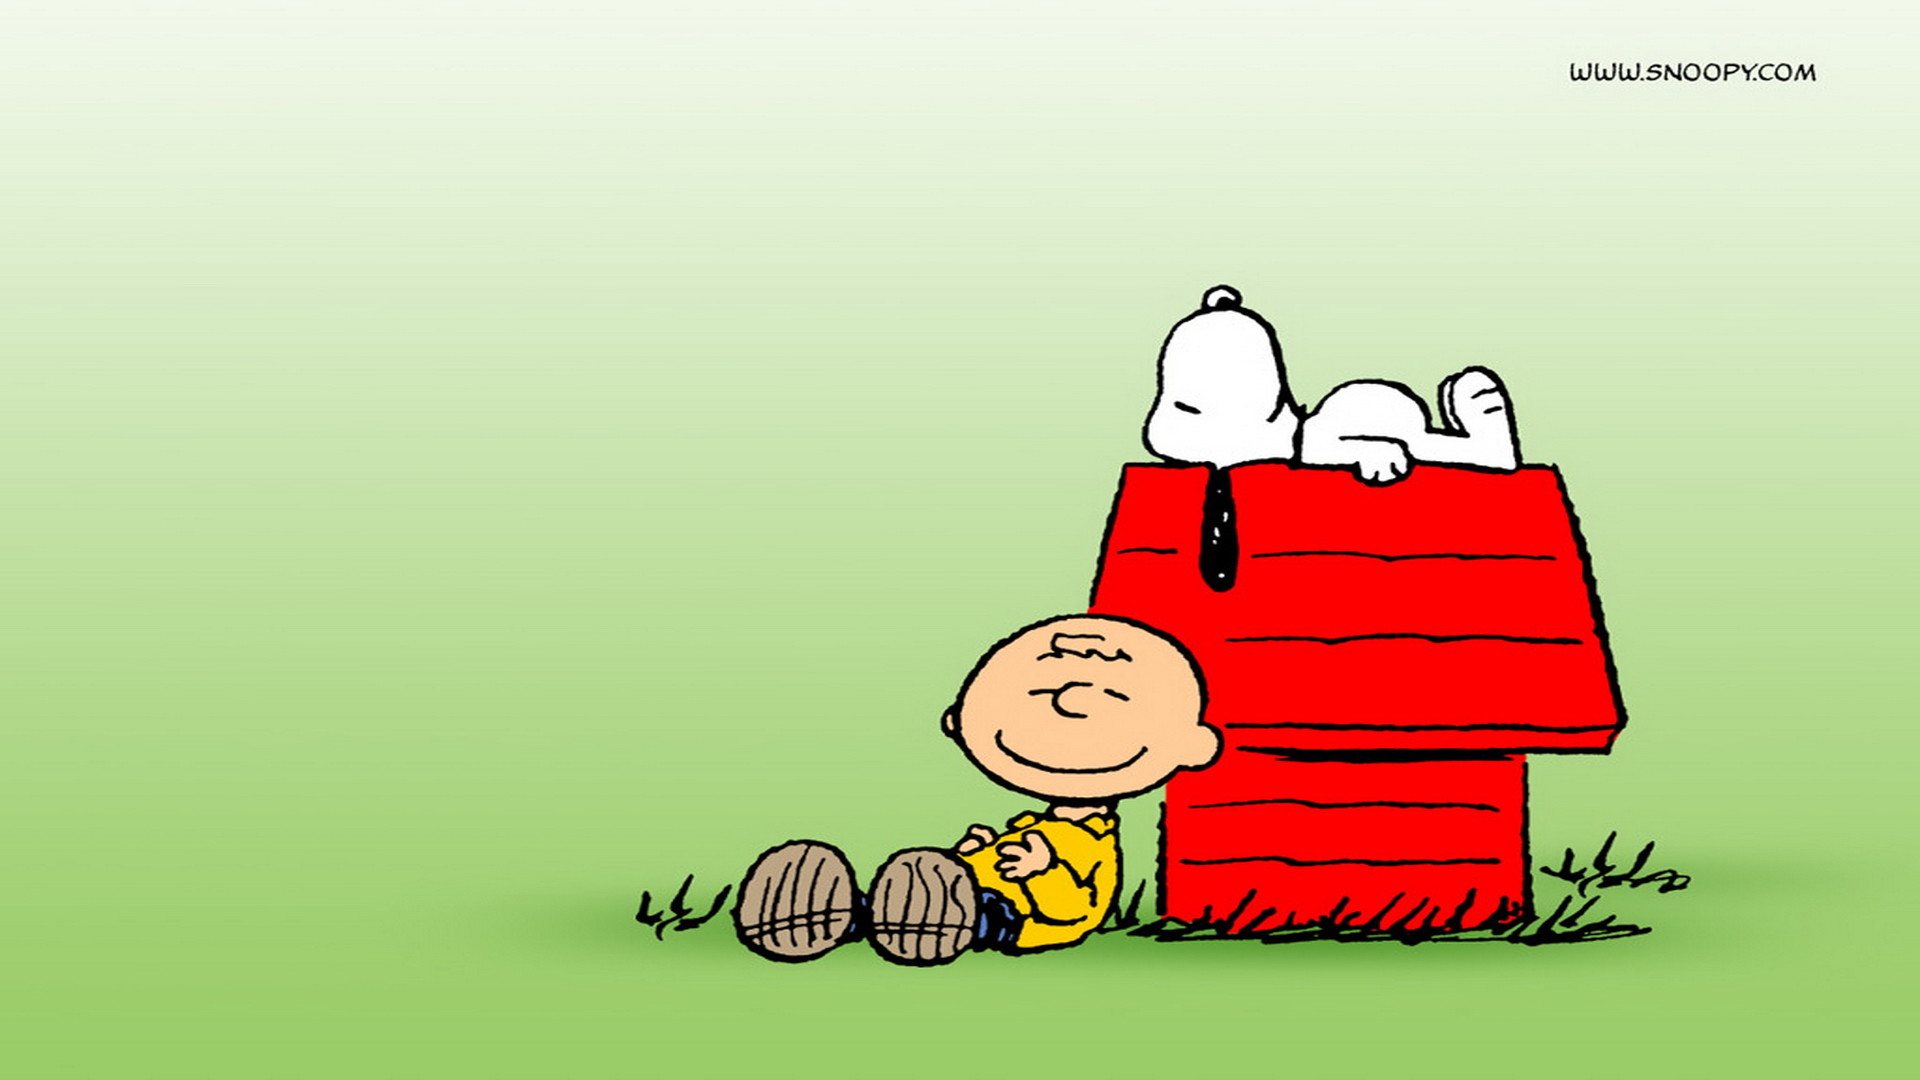 1920x1080 Snoopy Wallpapers 10 | HD Wallpapers | HD Background Wallpaper